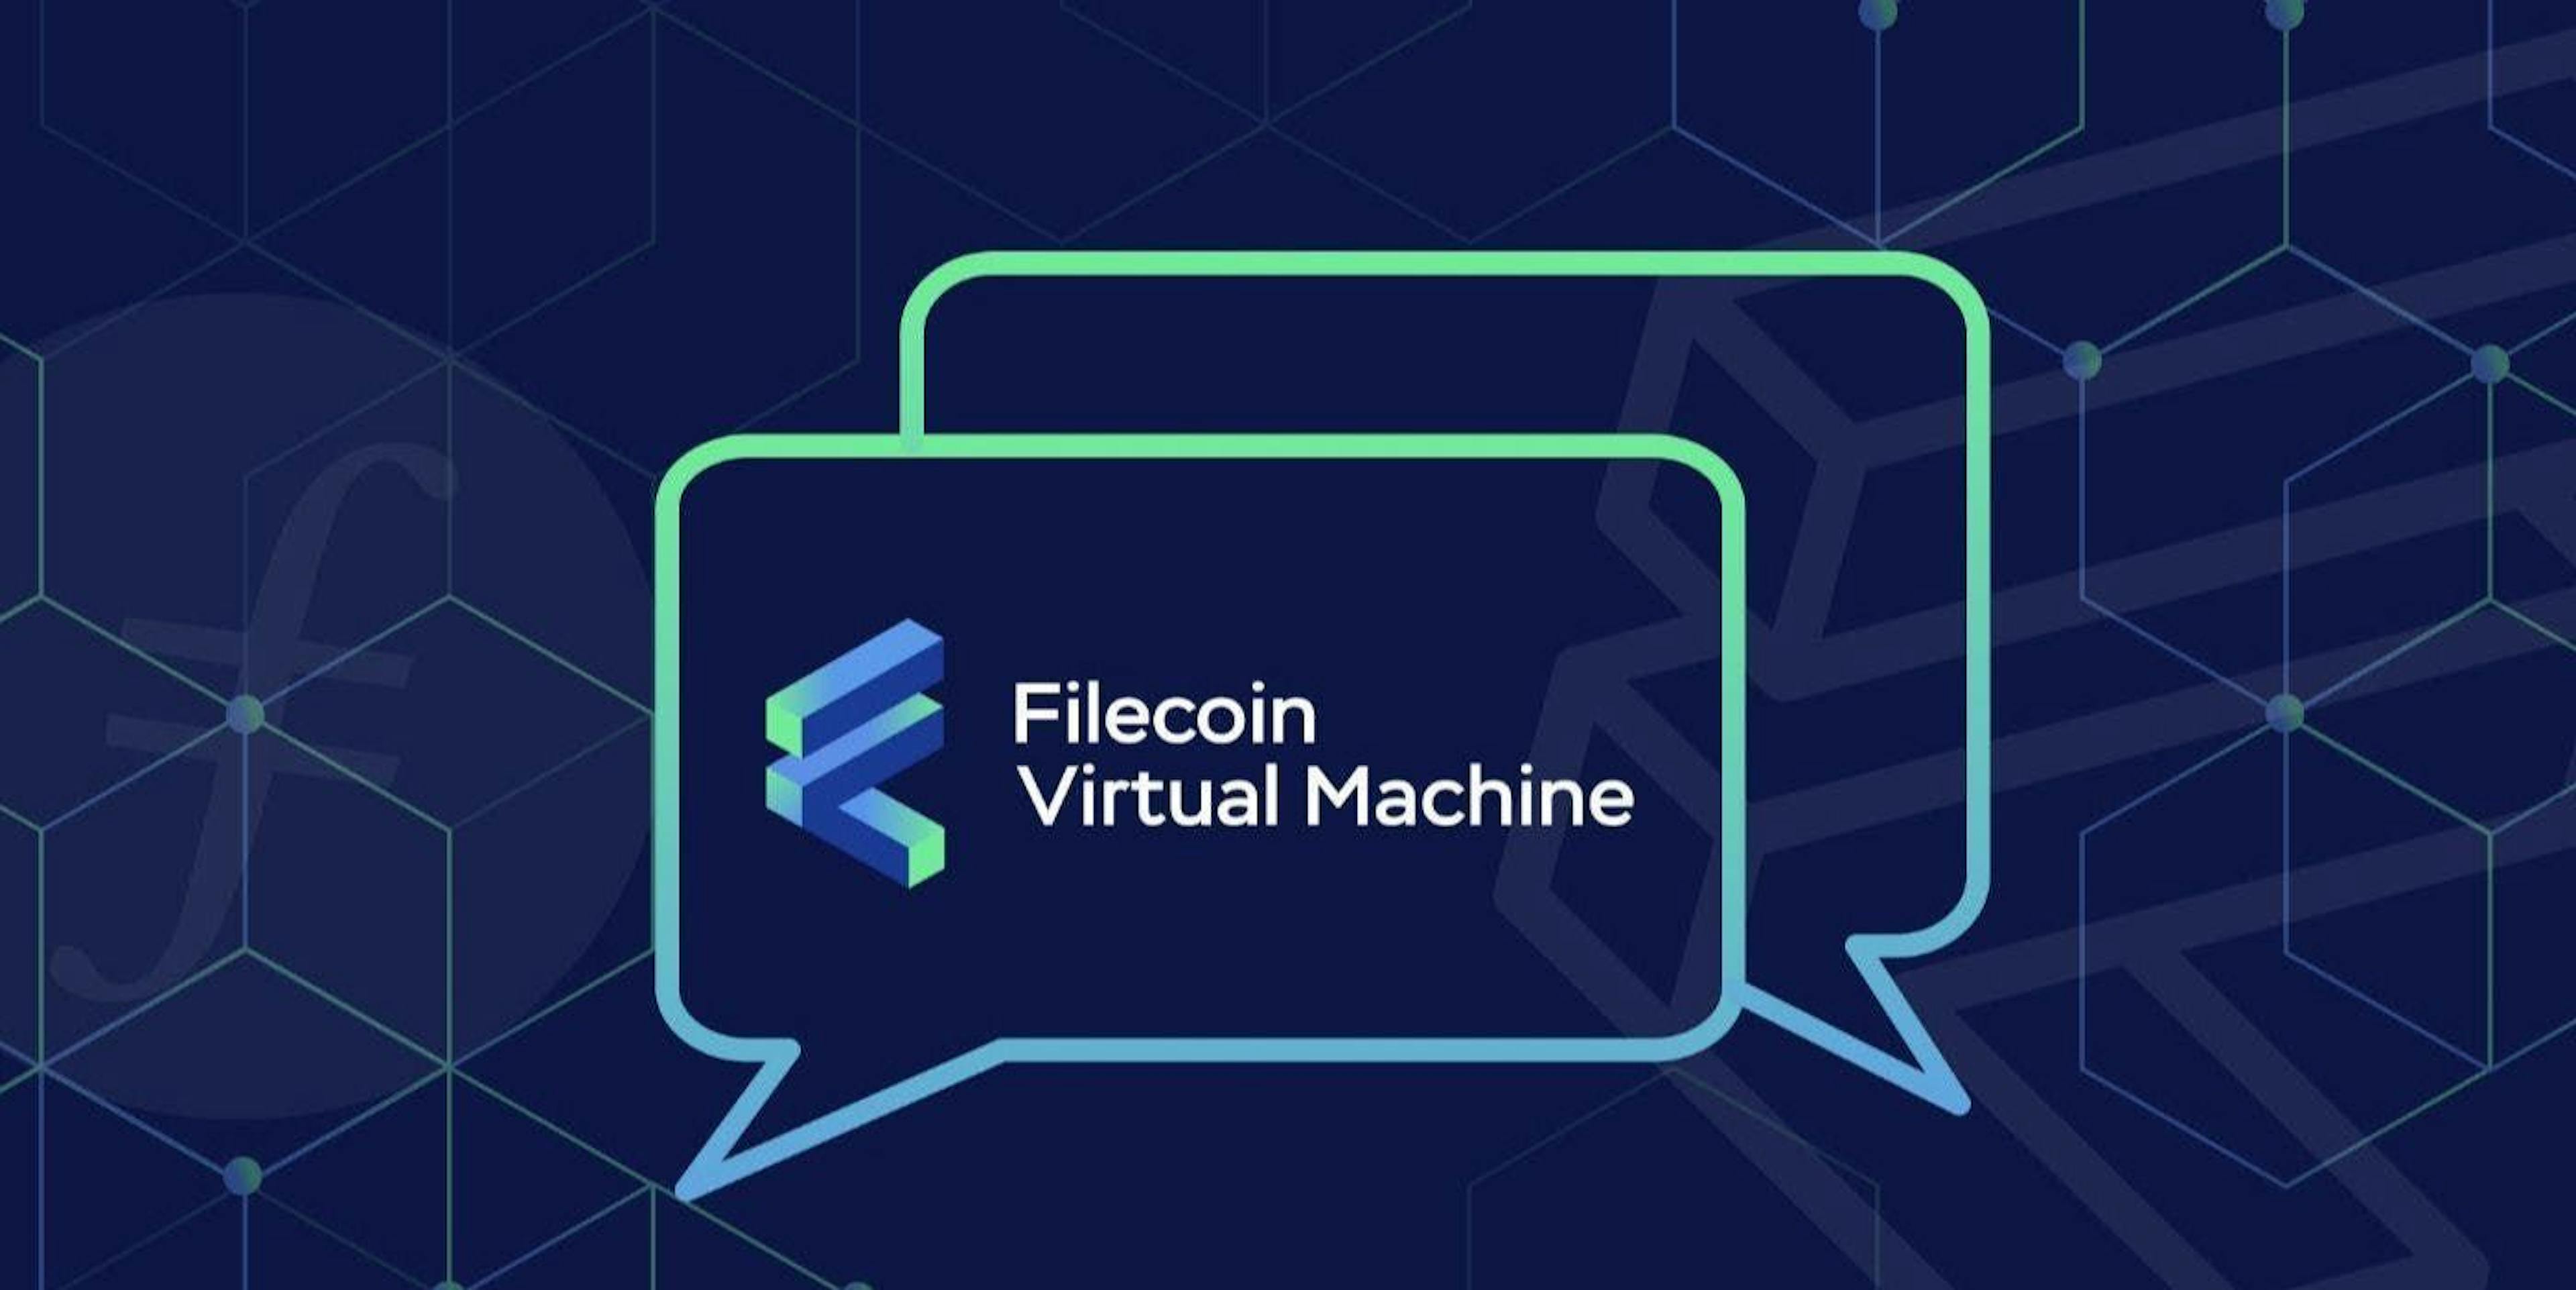 featured image - Filecoin Virtual Machine (FVM) Builder Cohort Launches to Mainnet